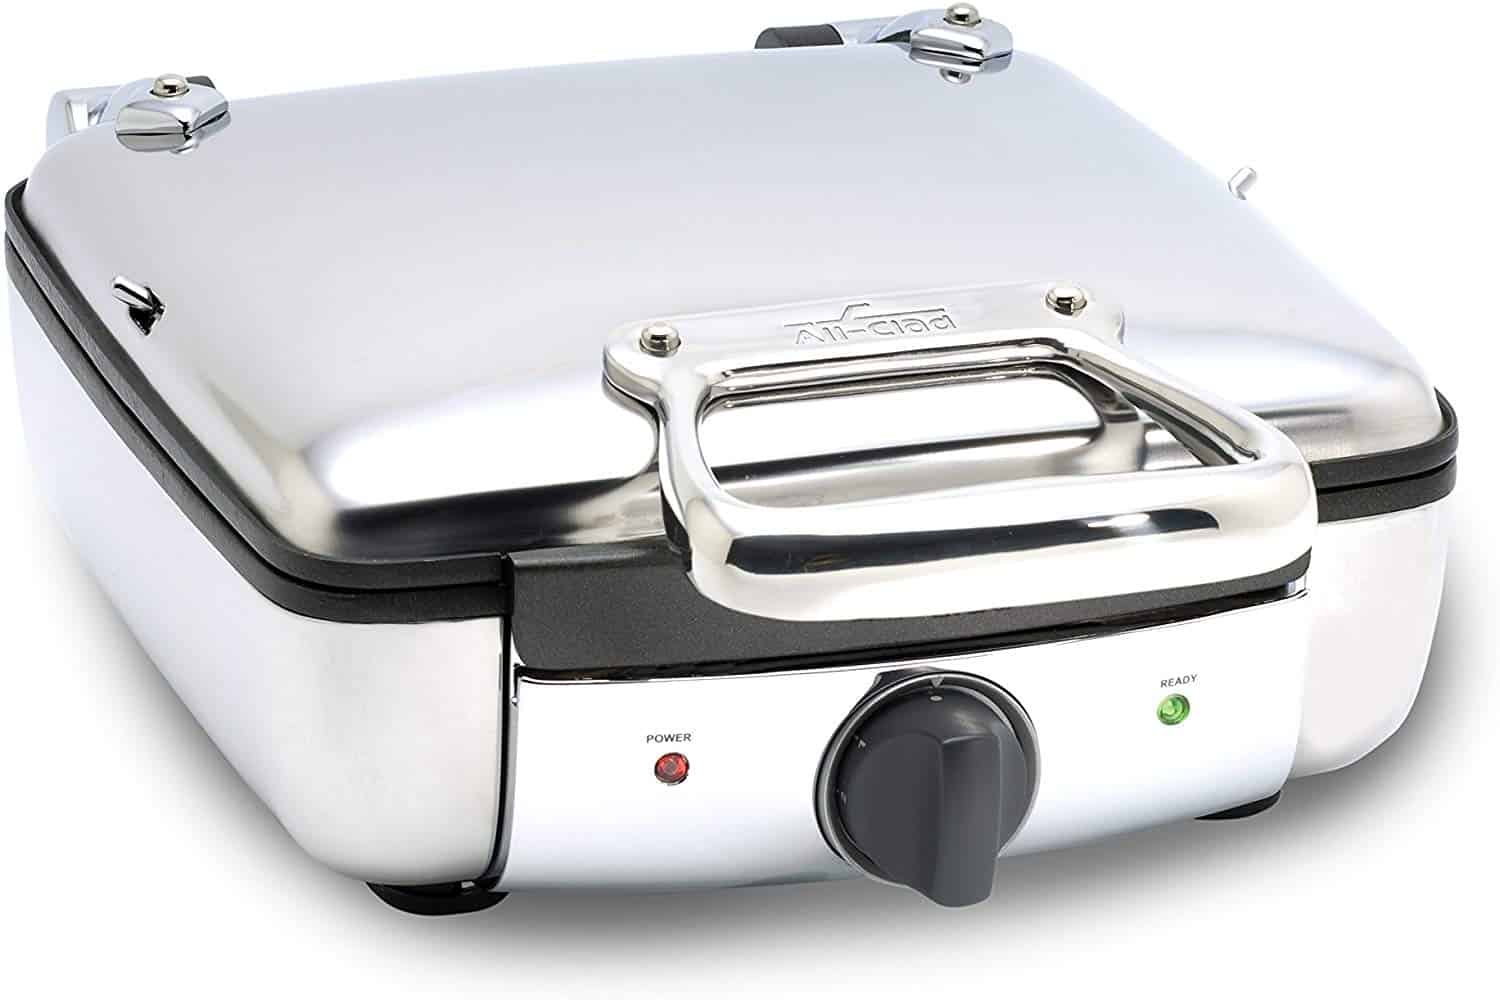 All clad 2100046968 99010gt stainless steel belgian waffle maker